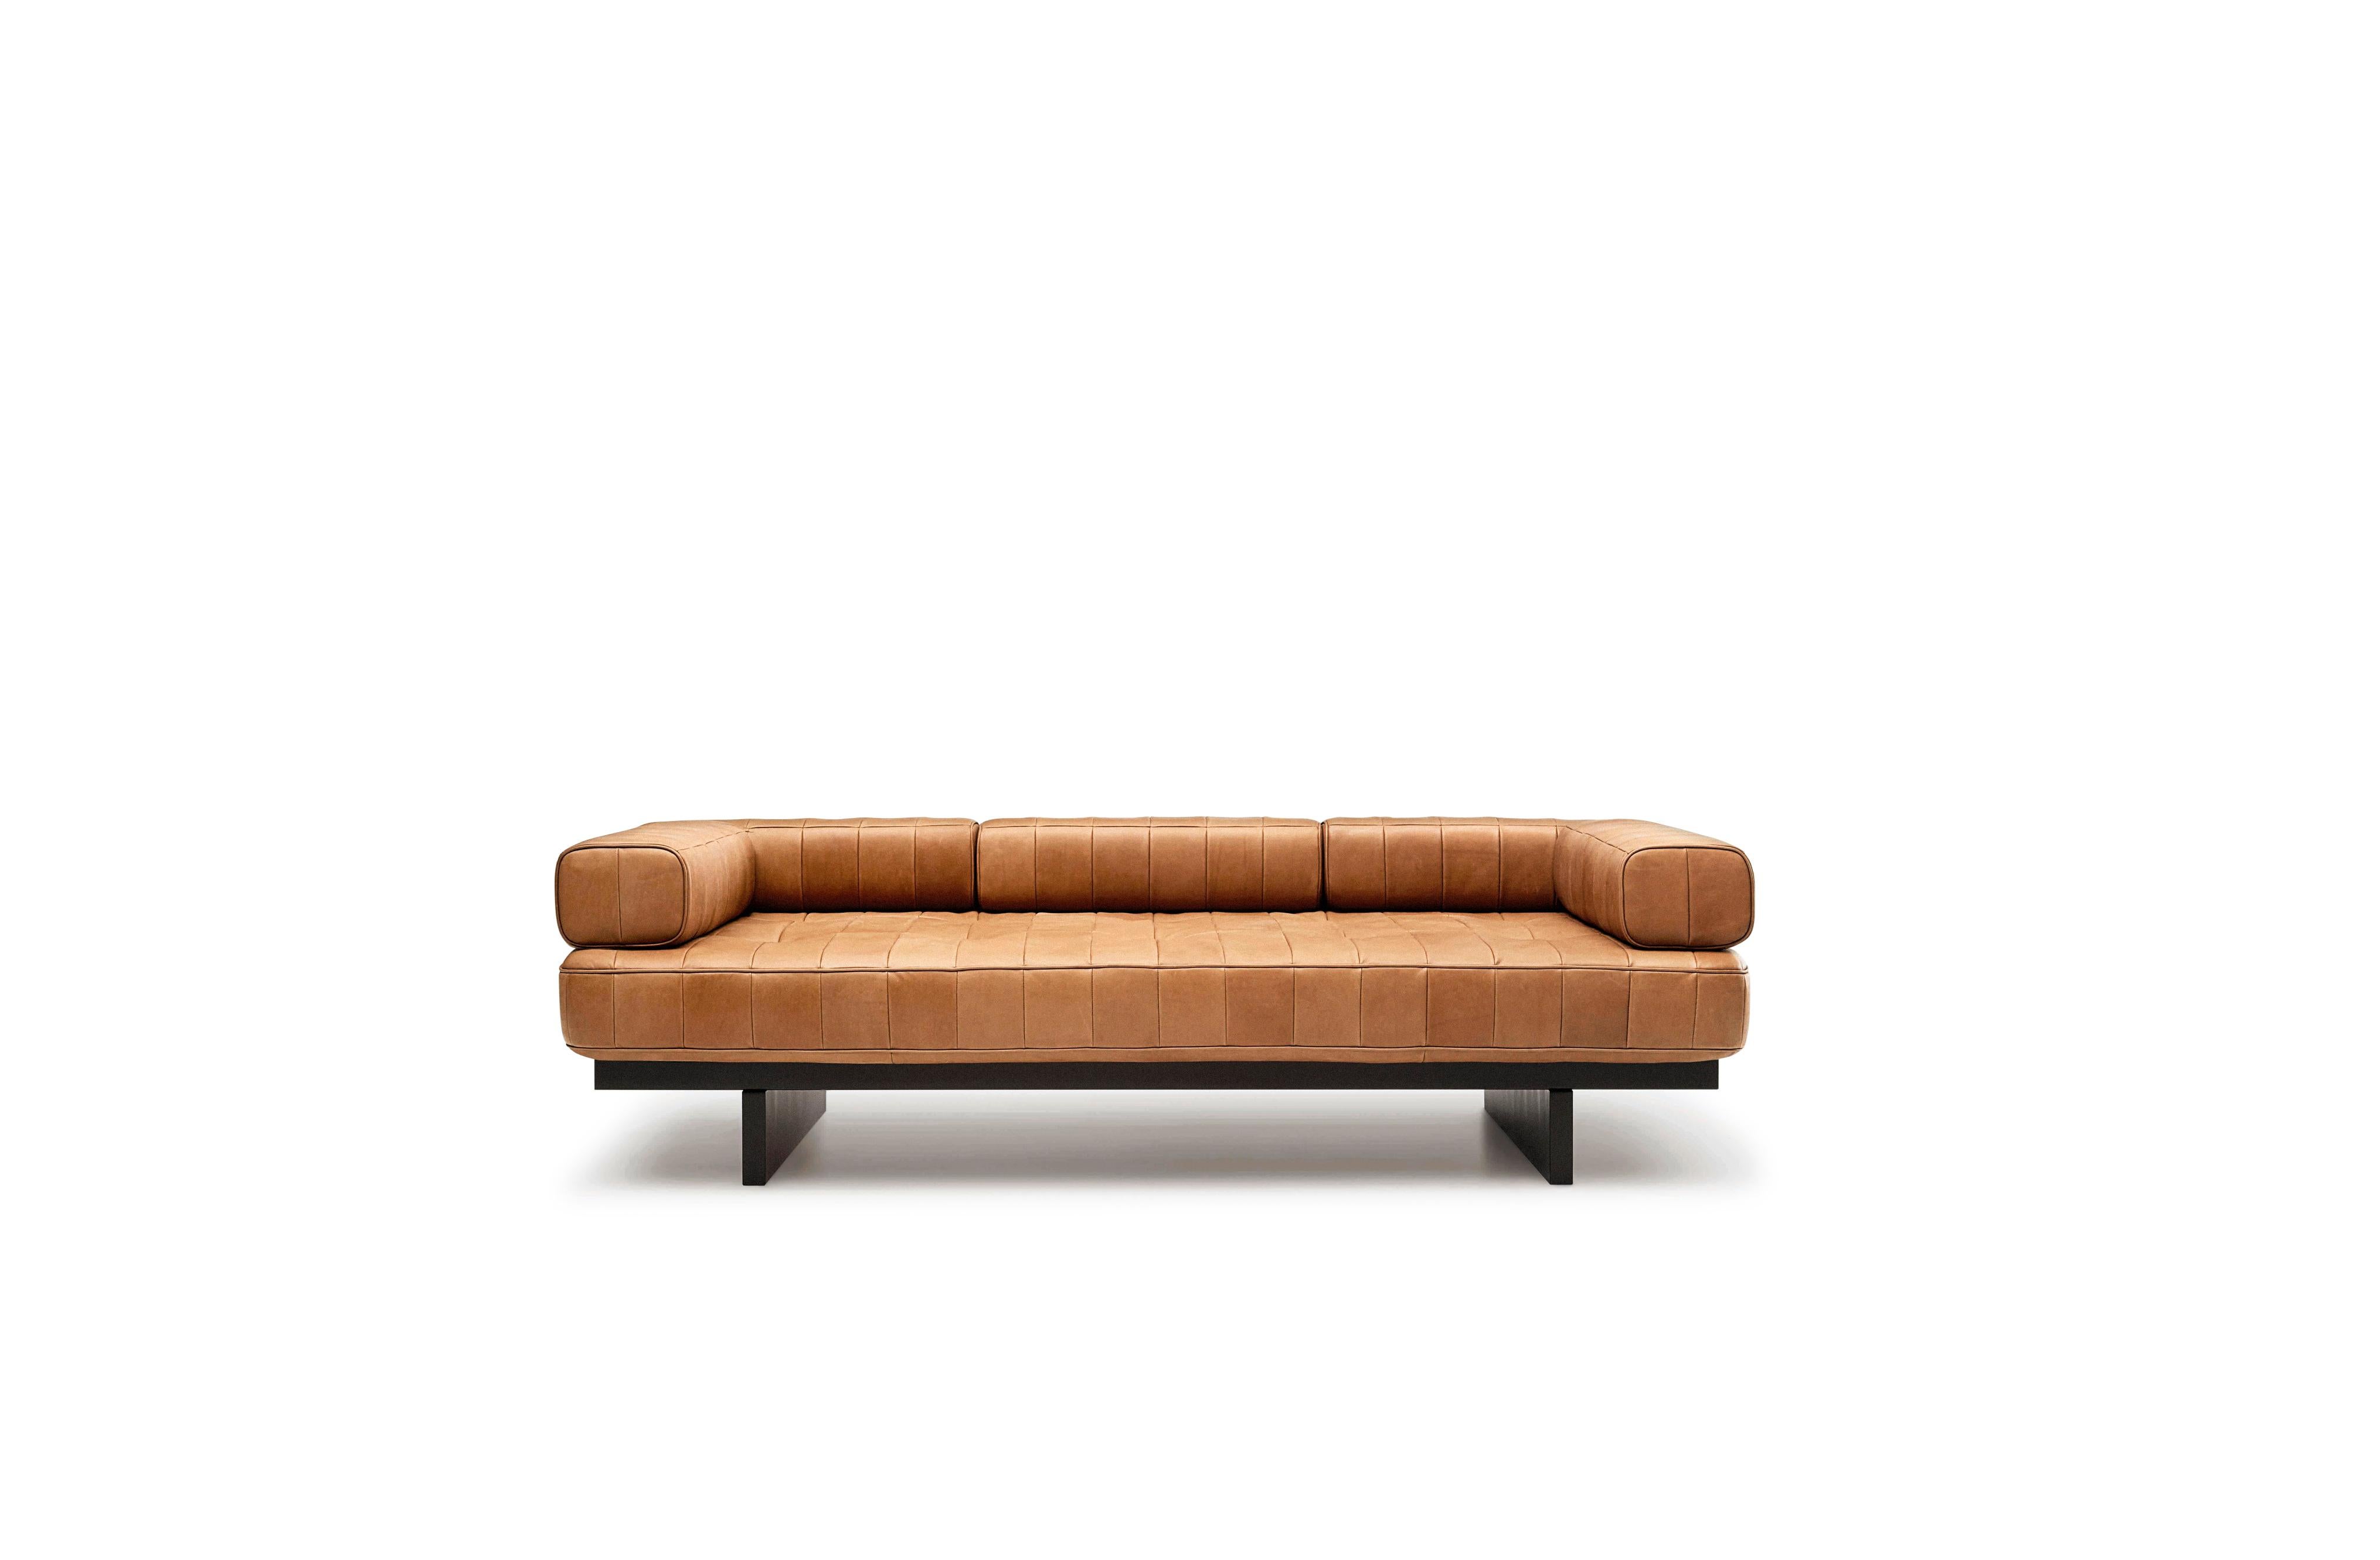 DS-80 lounge sofa by De Sede
Dimensions: D 69 x W 204 x H 58 cm
Materials: Frame made of solid wood, lacquered in silk matt black. SEDEX upholstery with SEDE-Lux padding. 
Glides for hard and soft floor coverings.

Prices may change according